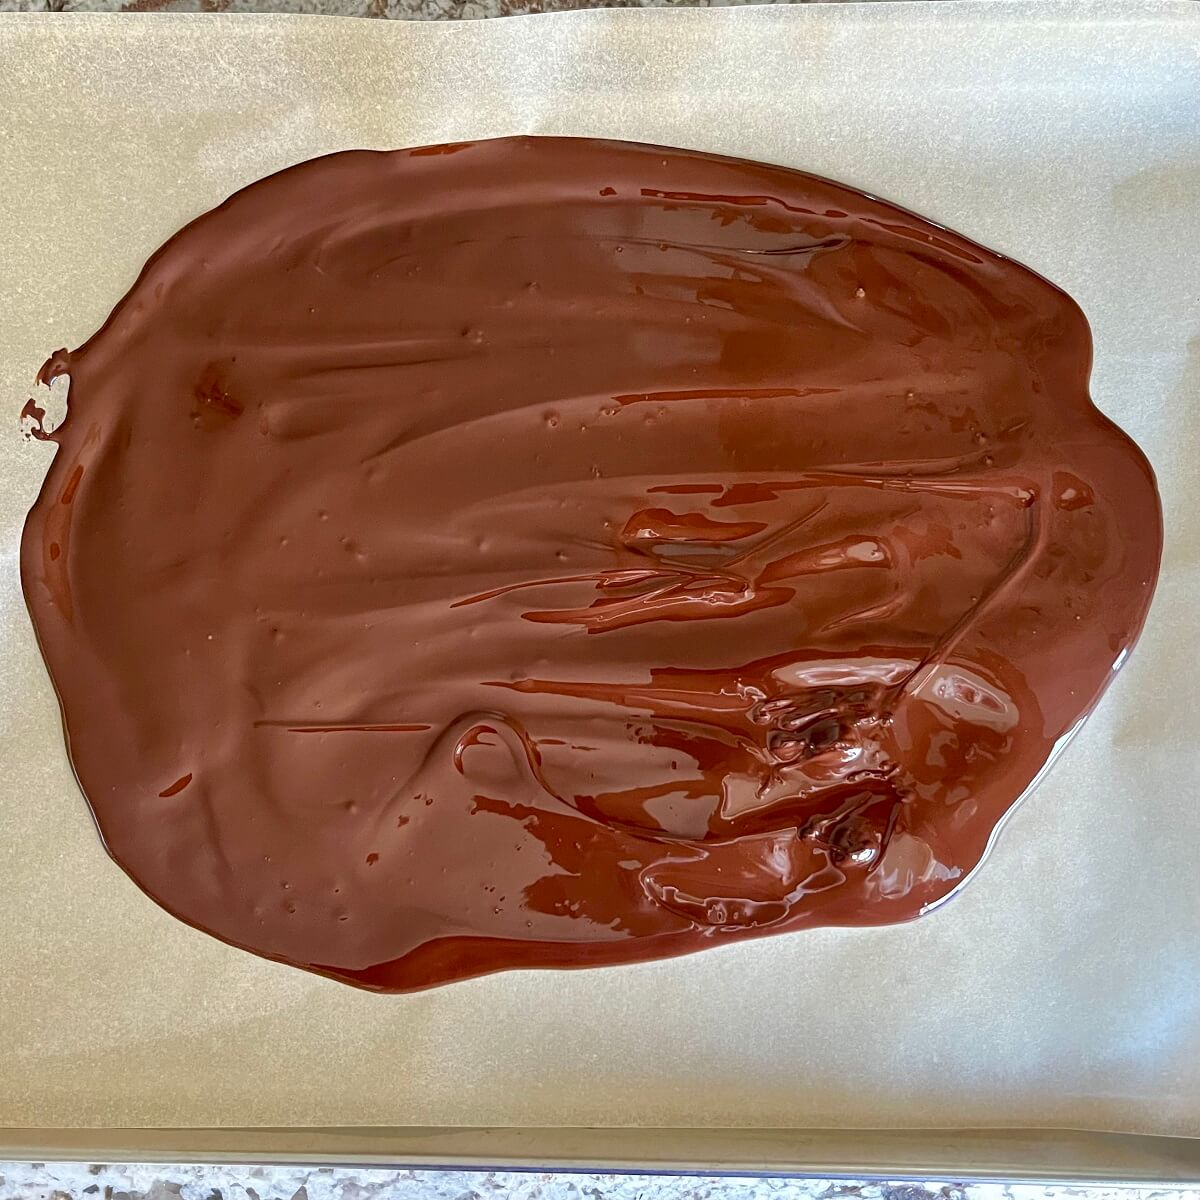 Melted chocolate spread on a sheet pan lined with parchment paper.